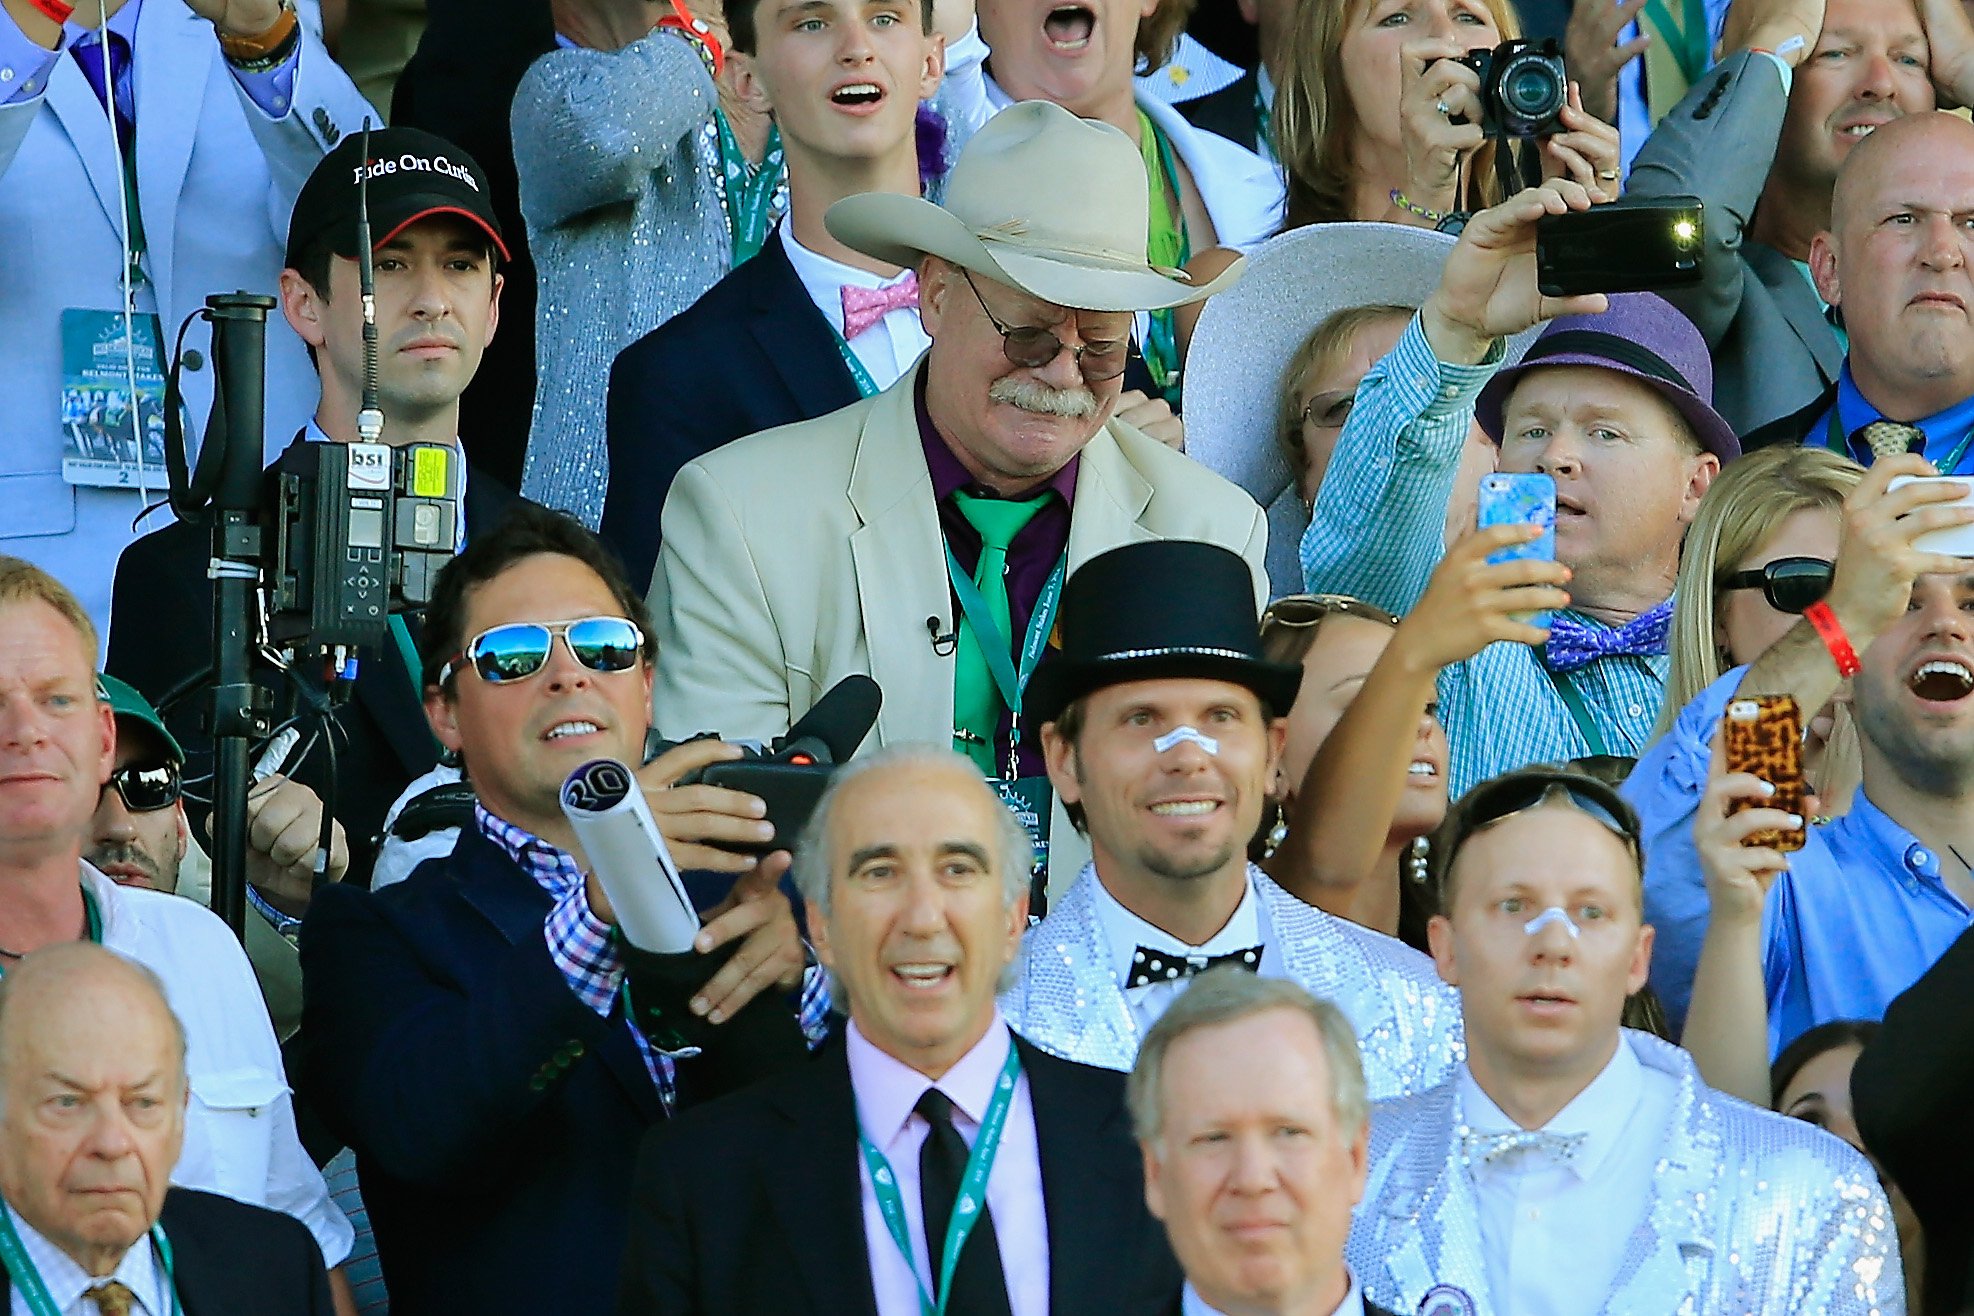 Steve Coburn, co-owner of California Chrome reacts while watching the 146th running of the Belmont Stakes at Belmont Park on June 7, 2014 in Elmont, New York. (Rob Carr—Getty Images)